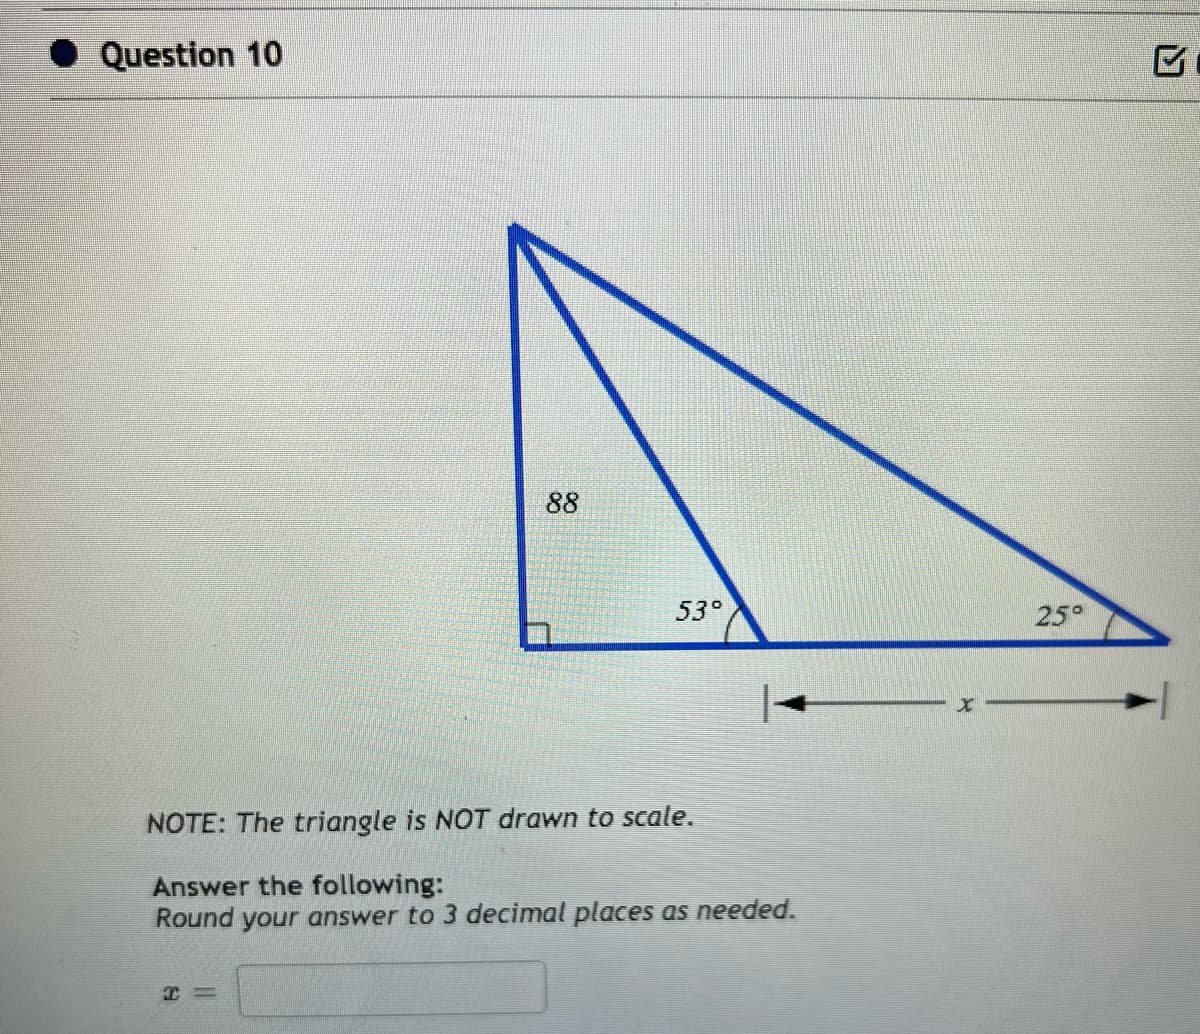 Question 10
88
53°
NOTE: The triangle is NOT drawn to scale.
Answer the following:
Round your answer to 3 decimal places as needed.
25°